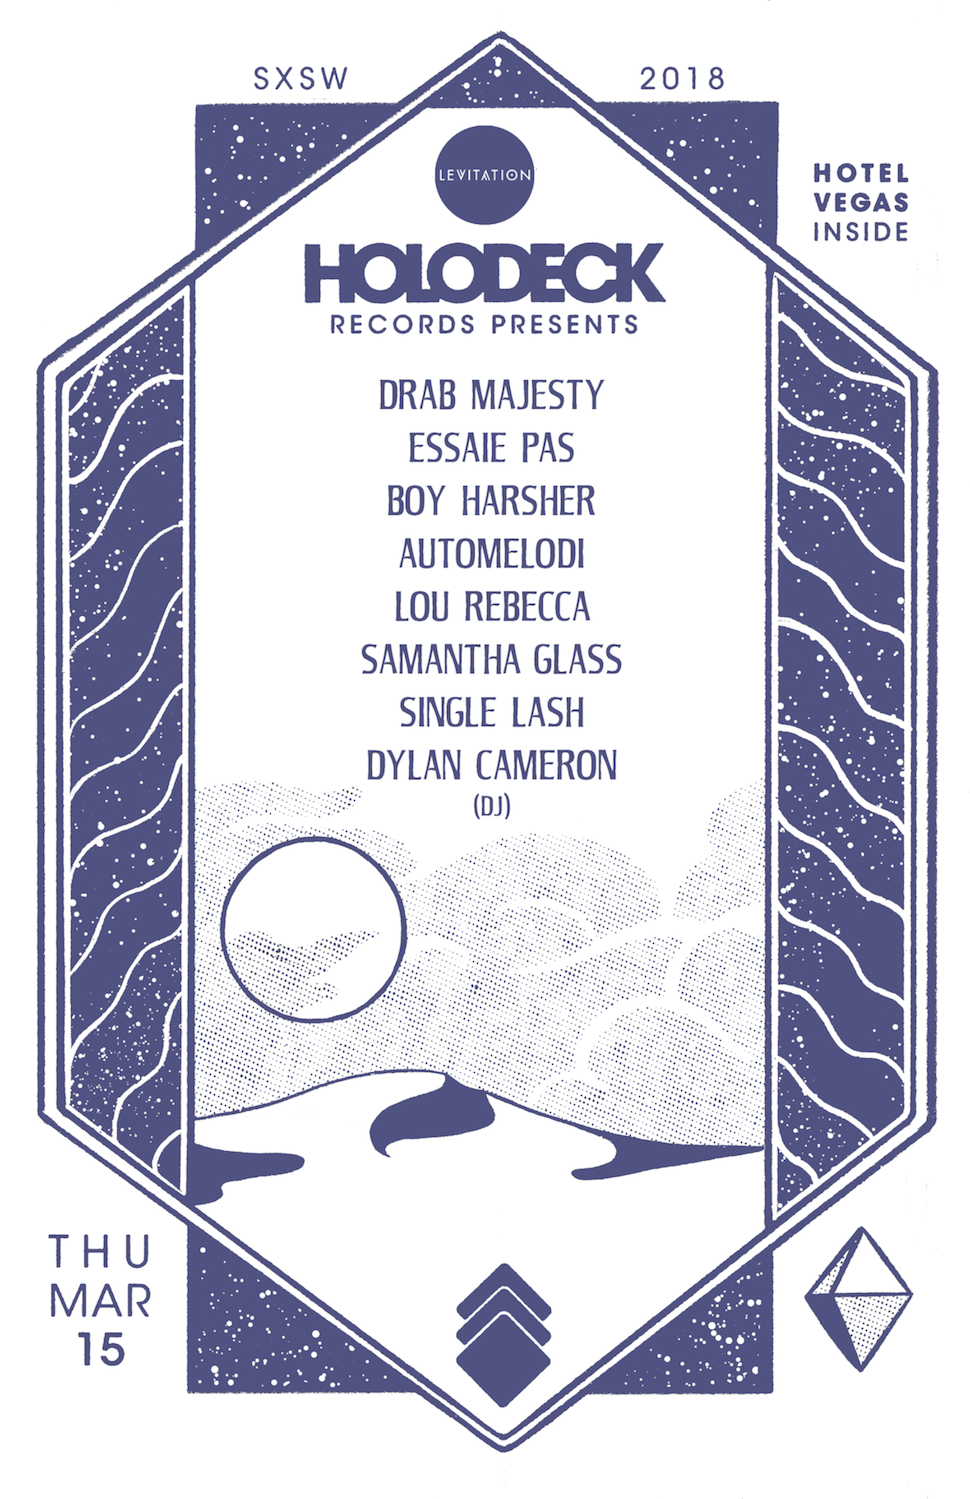 Holodeck Records SXSW